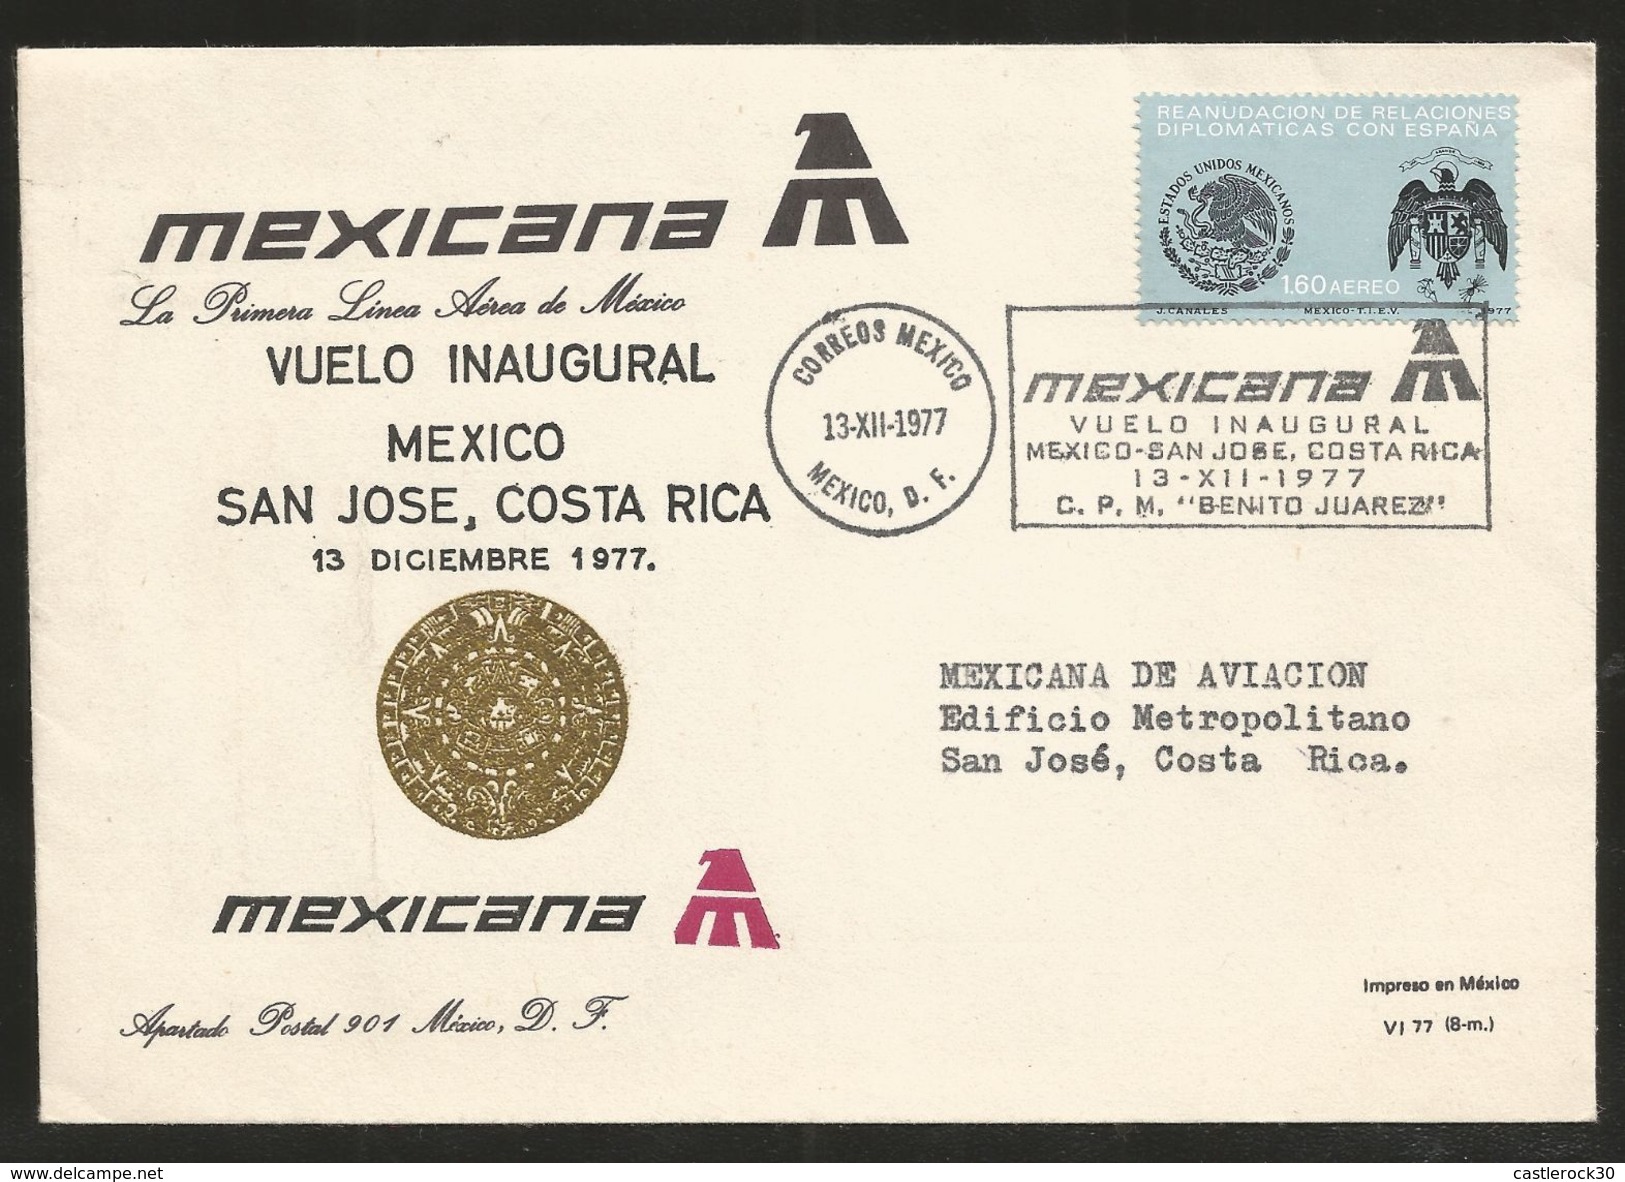 J) 1977 MEXICO, INAUGURAL FLIGHT, MEXICO-SAN JOSE, COSTA RICA, RESUMING DIPLOMATIC RELATIONS WITH SPAIN, EMBLEM AND SHIE - Mexico